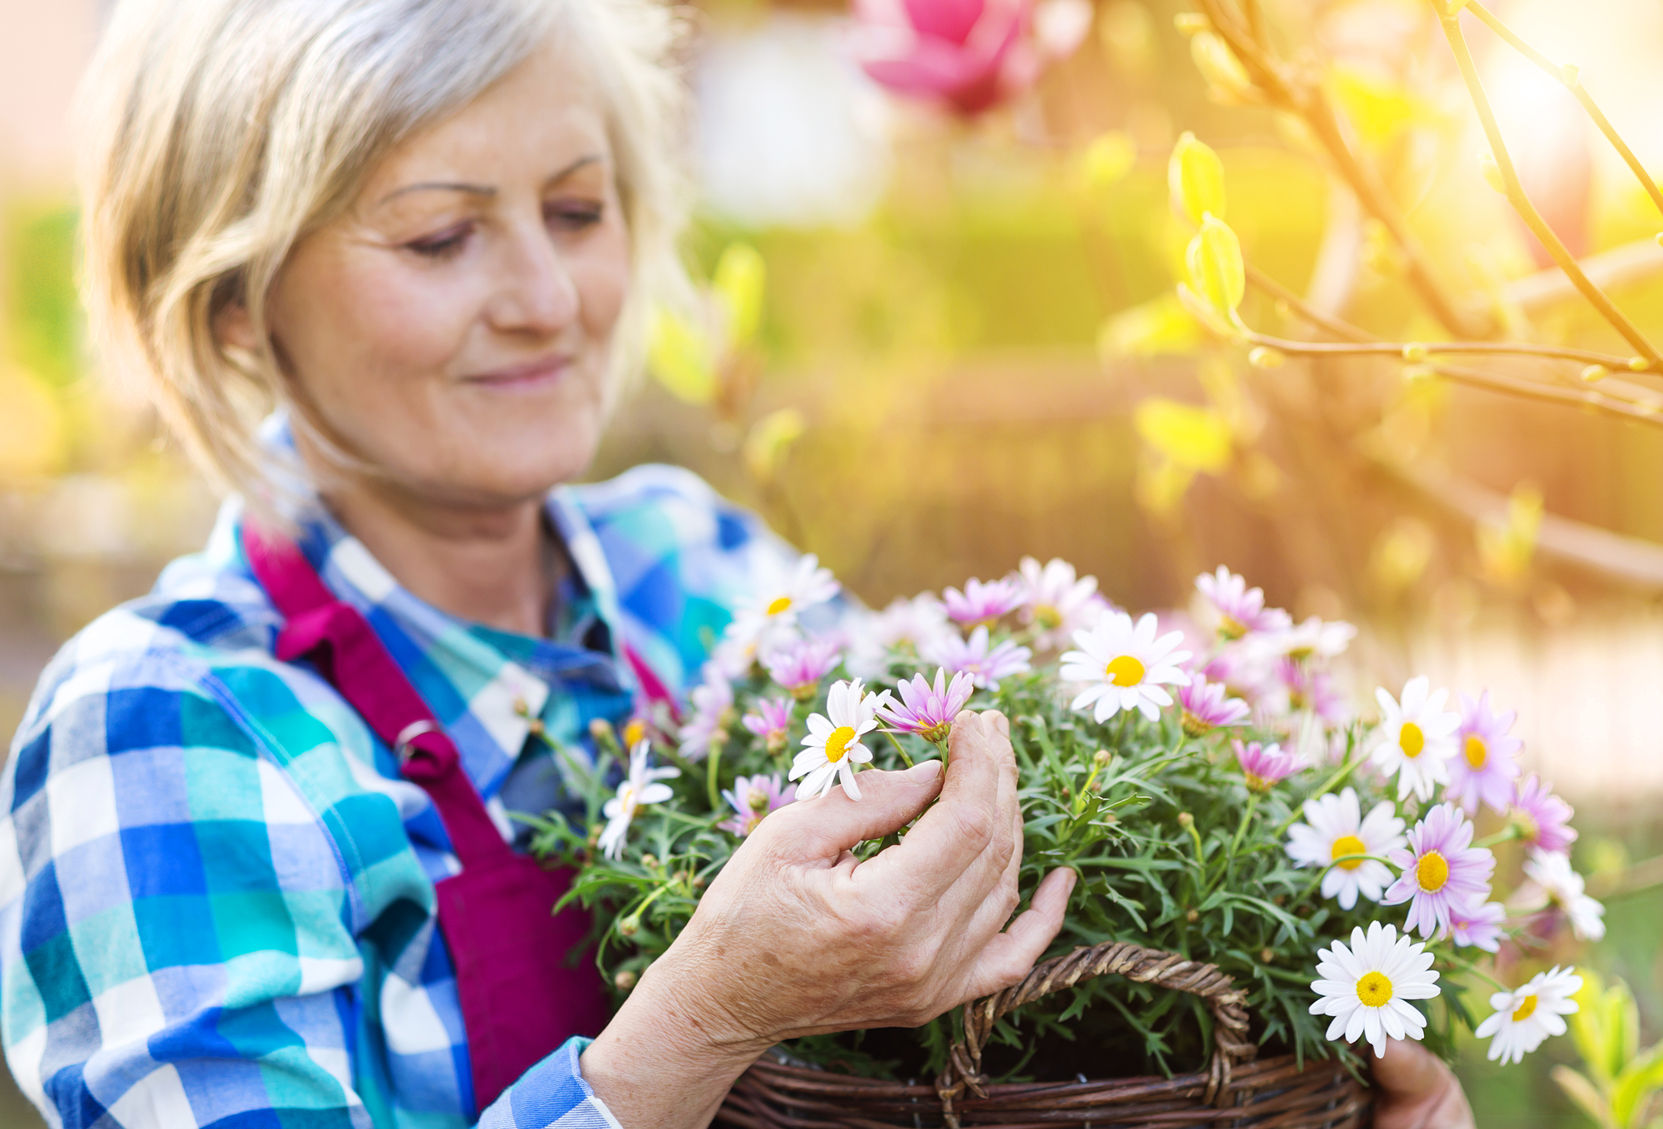 Woman looking at a basket of pink and white daisies